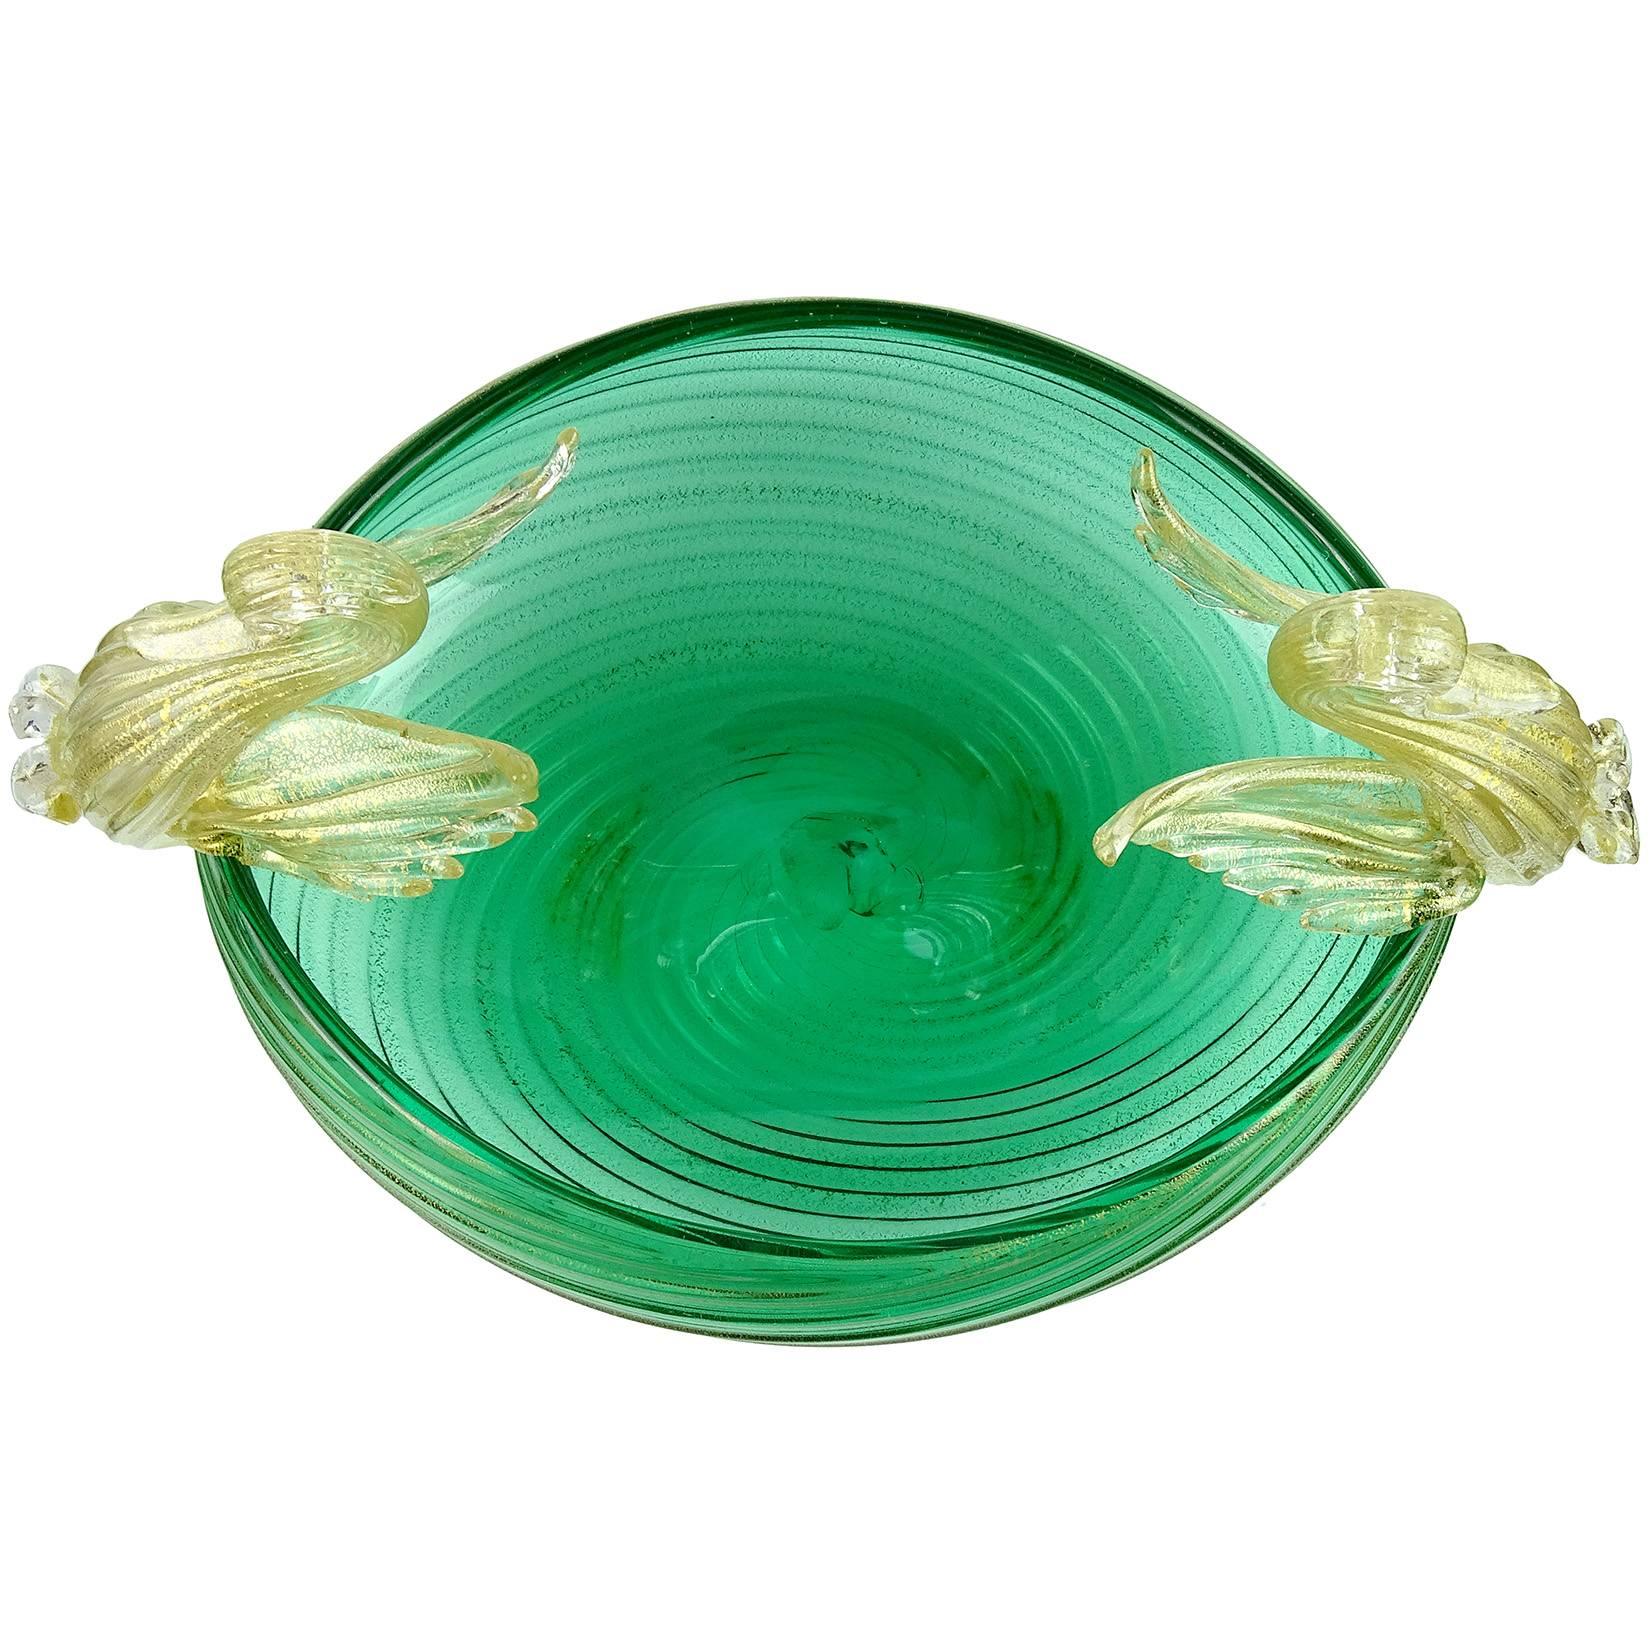 Beautiful Venetian style Murano hand blown green and gold flecks Italian art glass swans bowl. Documented to the Seguso Vetri d'Arte company, circa 1946. Seen in their photo archives, and published in the company's new book, item number 8093. The